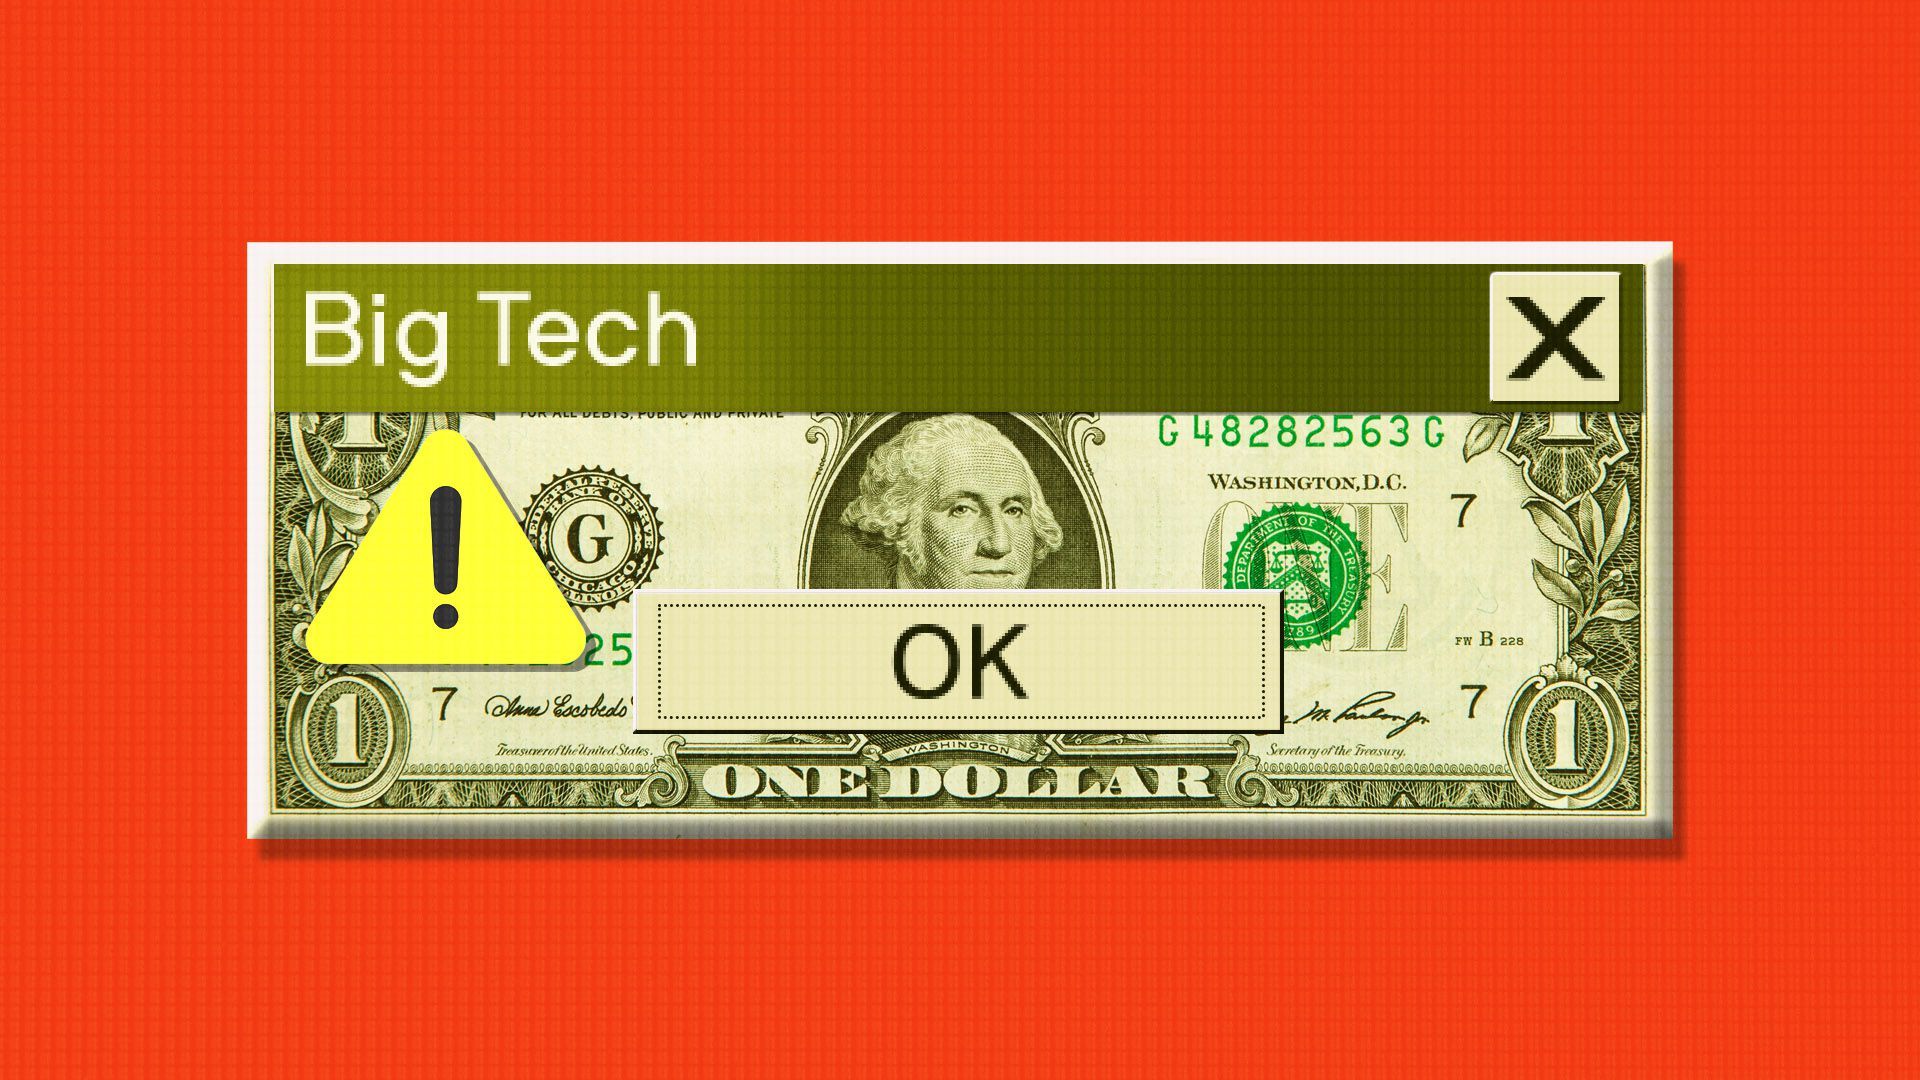 Illustration of a dollar shaped like a computer error dialogue box that reads 